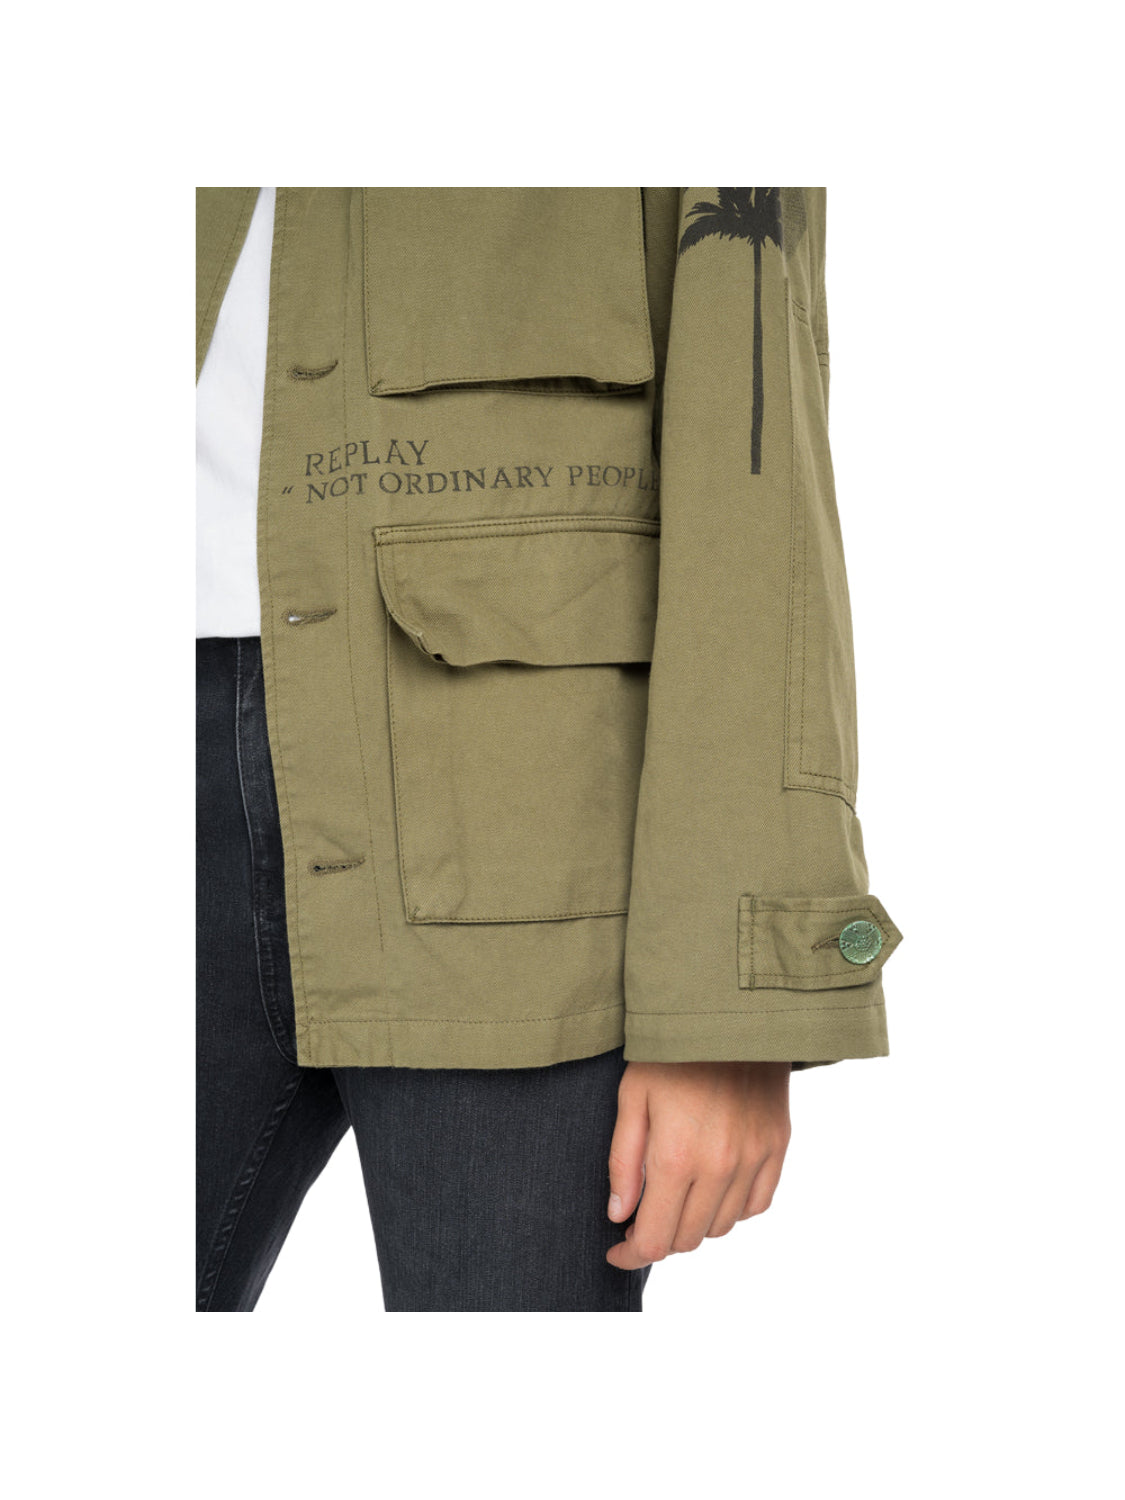 Cotton And Linen Army Jacket